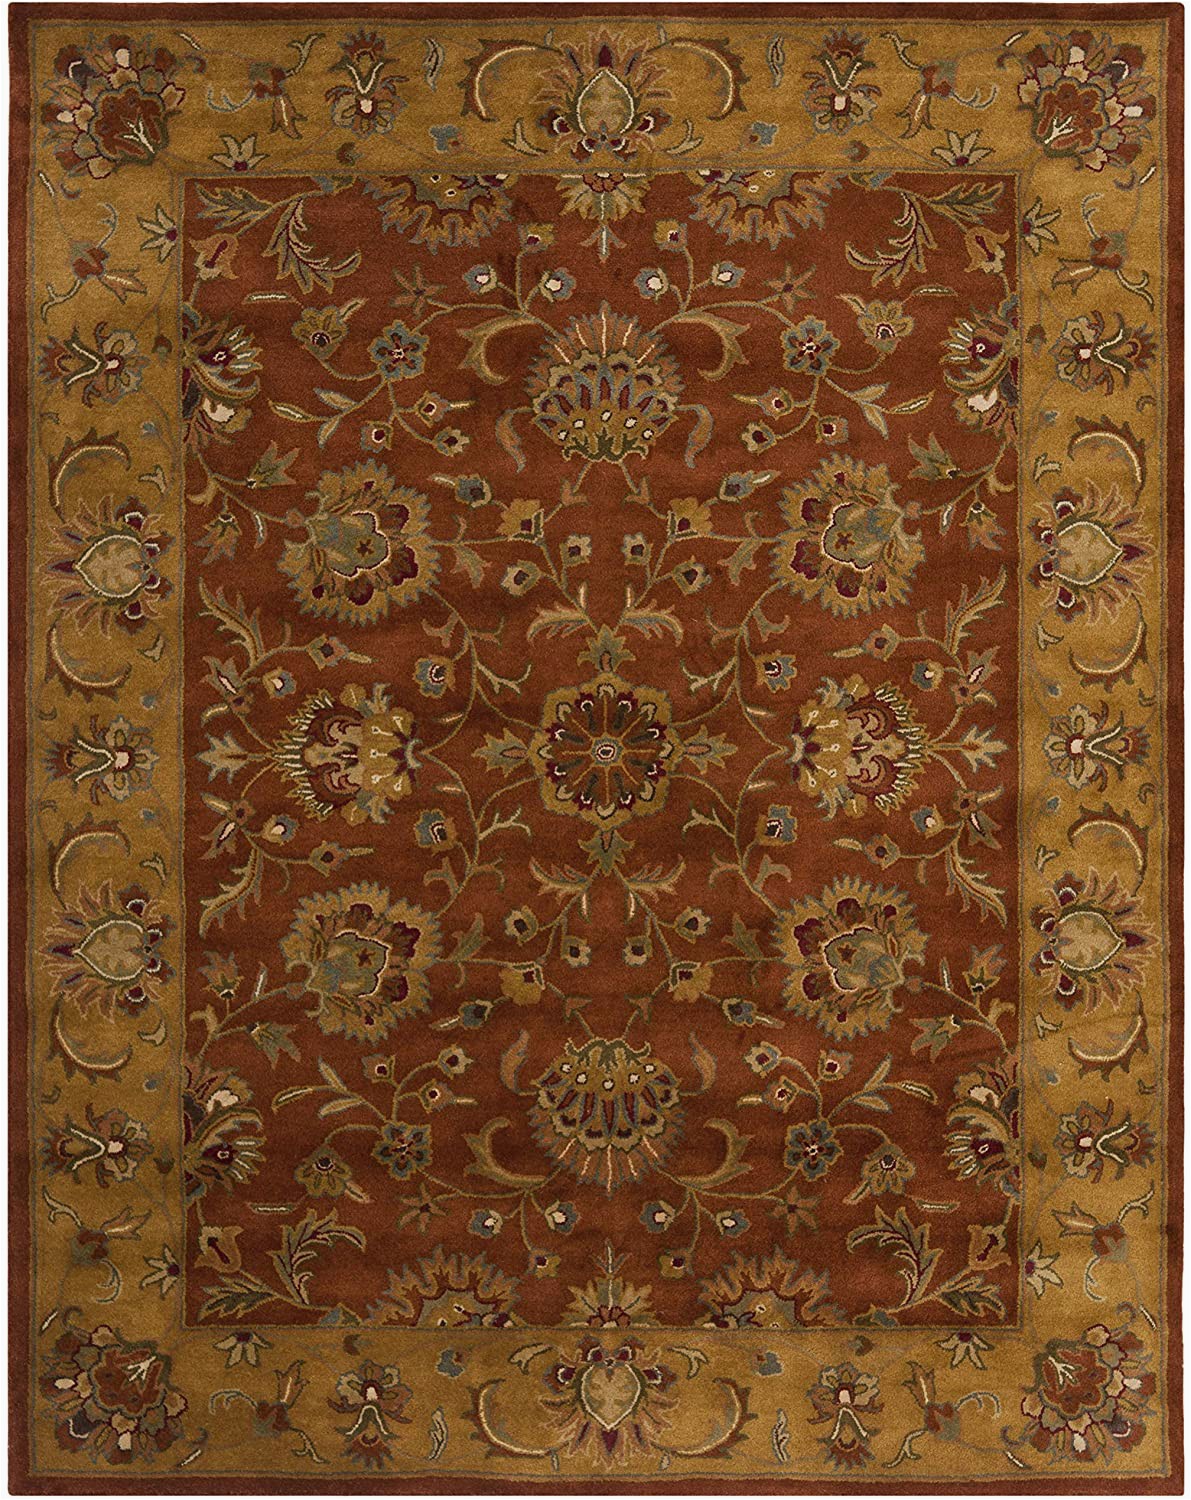 11 by 15 area Rugs Safavieh Heritage Collection Hg820a Handcrafted Traditional oriental Red and Natural Wool area Rug 11 X 15